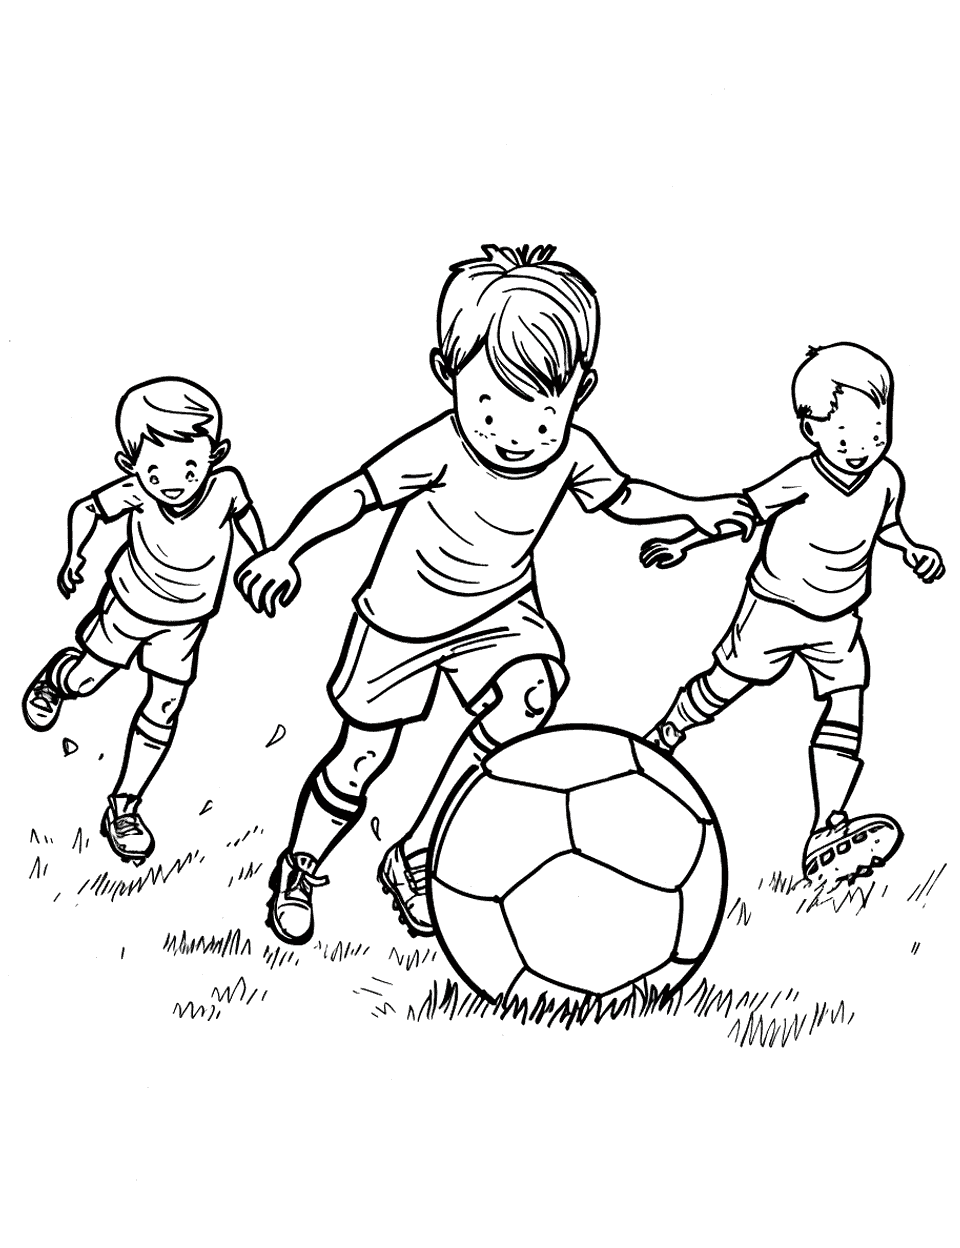 Youth Soccer Match Coloring Page - Young children playing soccer on a small field, showing teamwork and enjoyment.